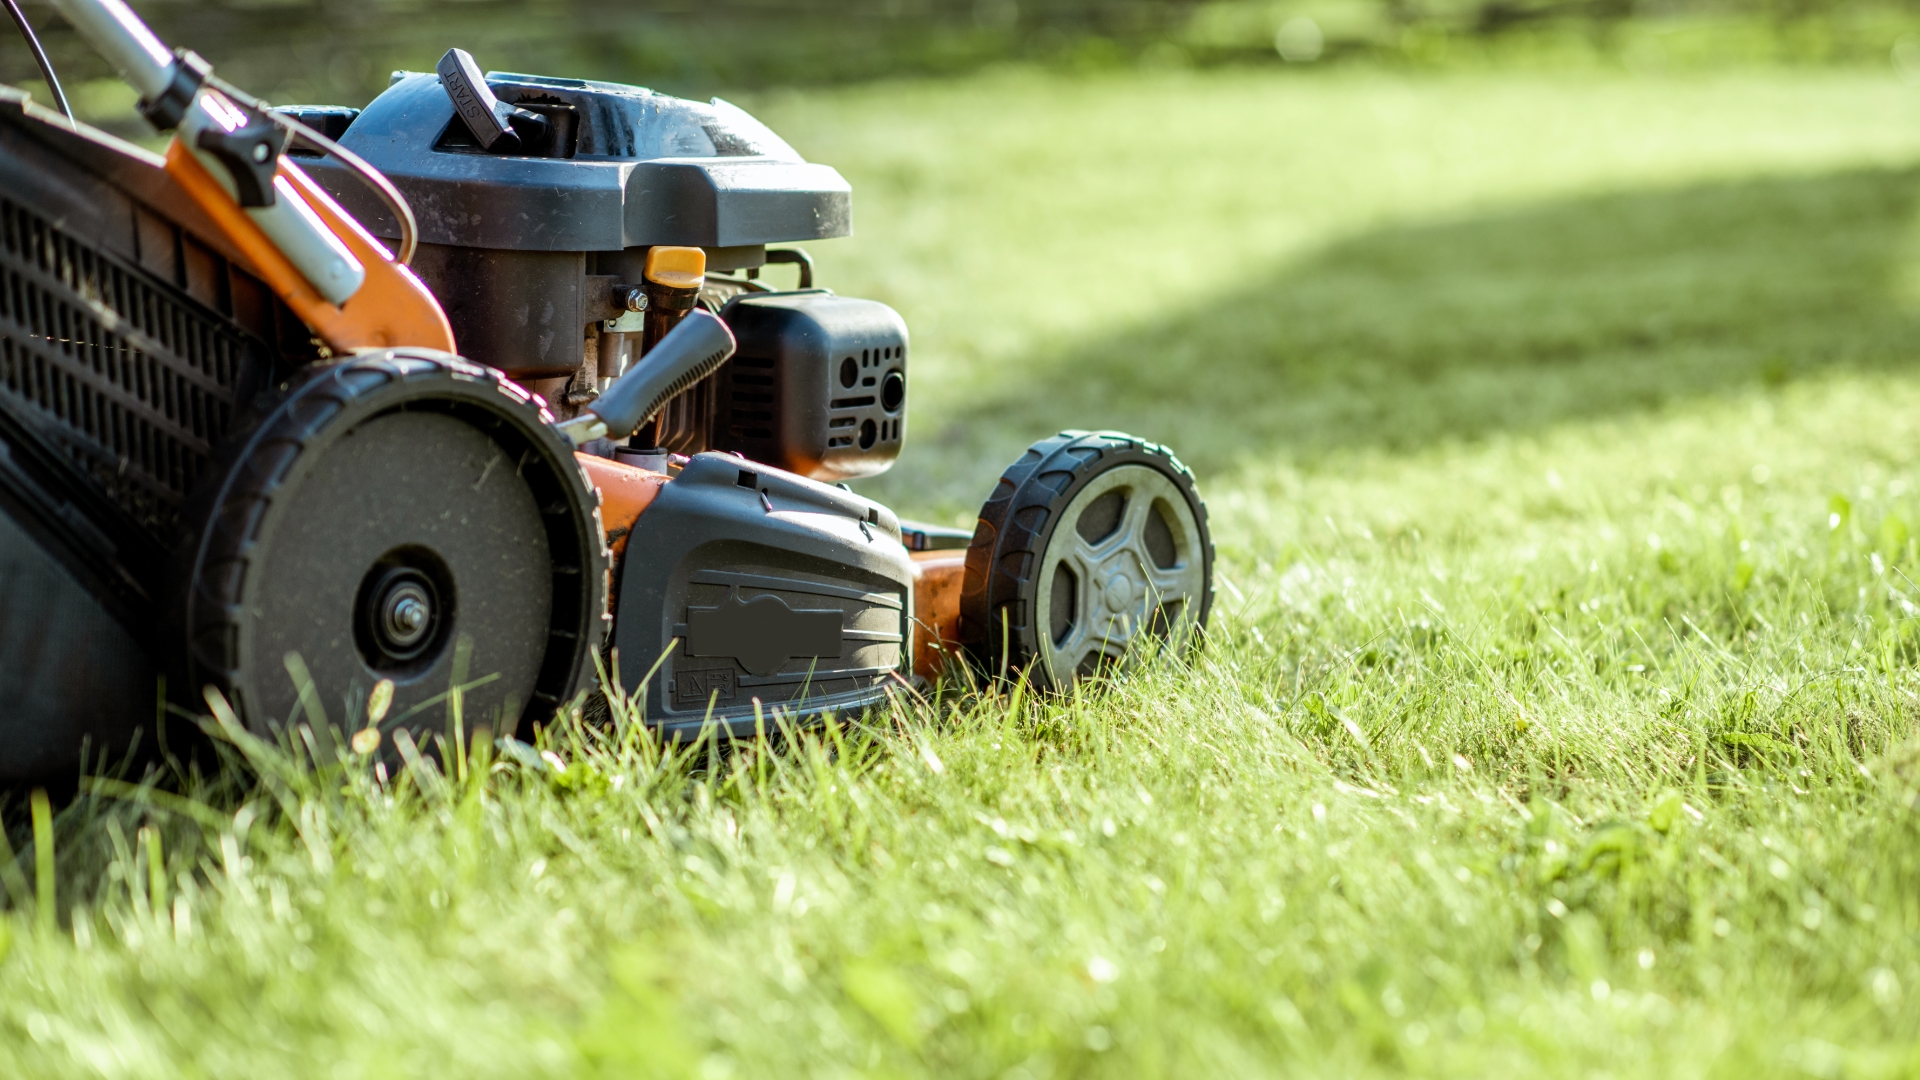 Is Your Lawn Equipment Tuned Up? Spring Checklist!